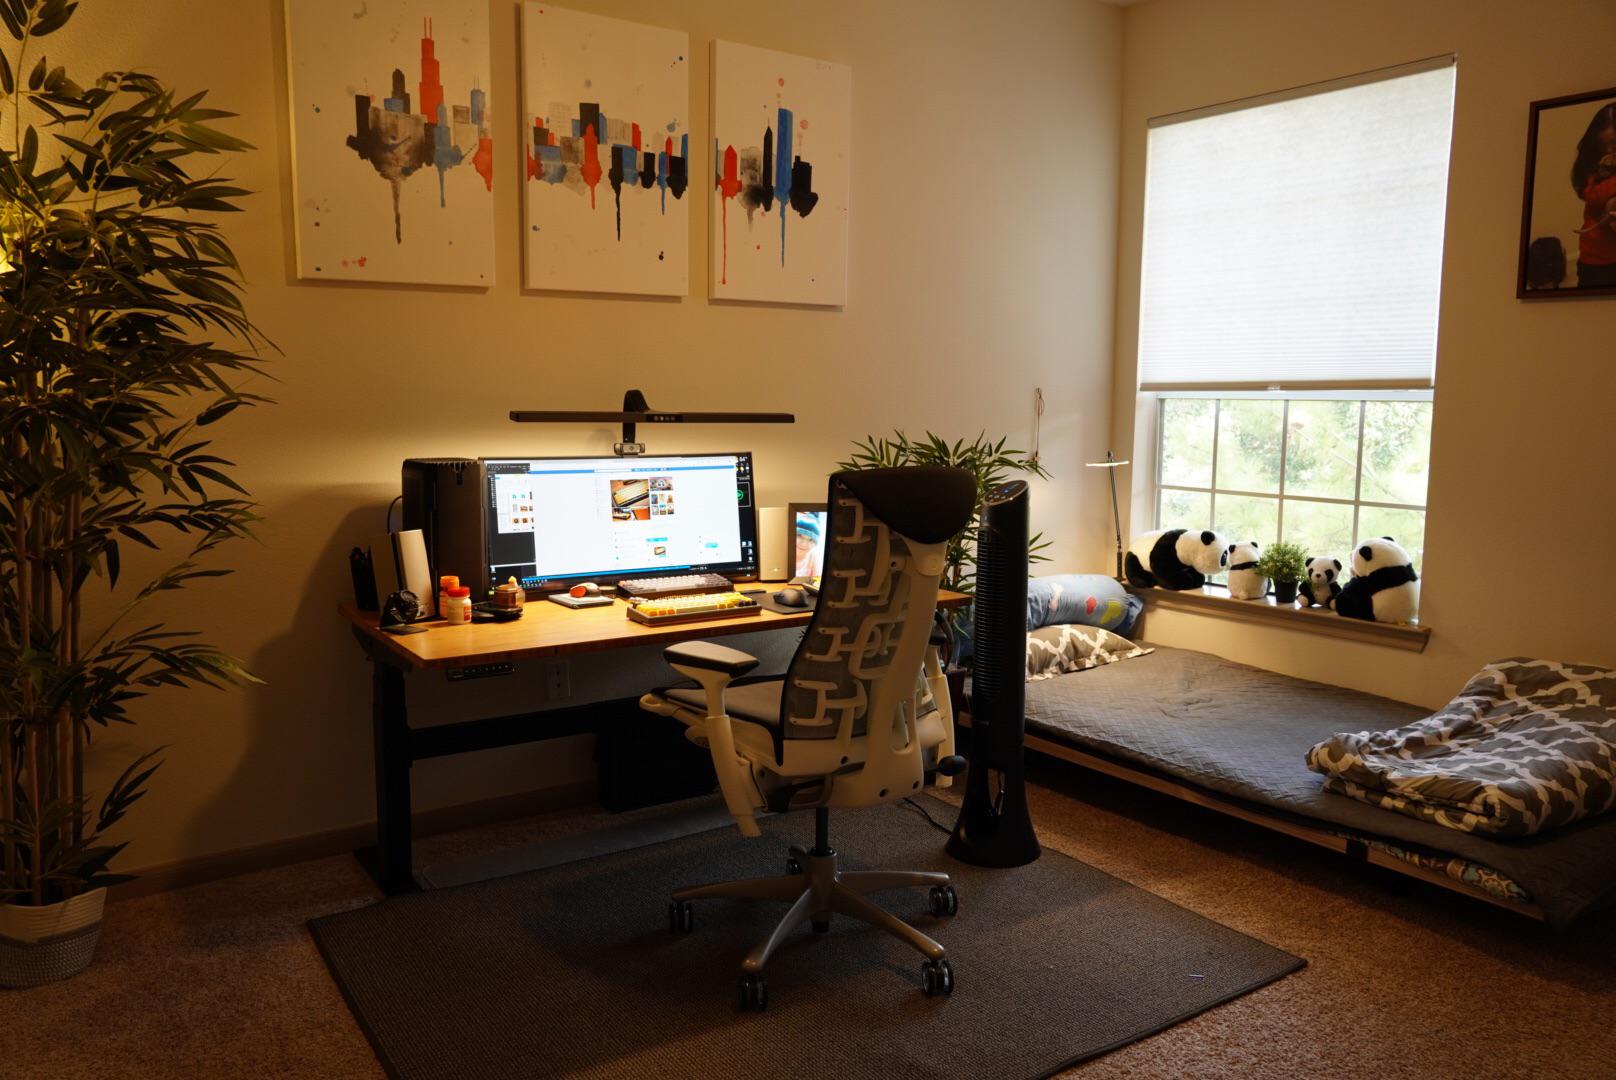 A cozy bedroom office with stuffed pandas framing the window above a low cot next to a warmly lit, uncluttered desktop with a Herman Miller office chair